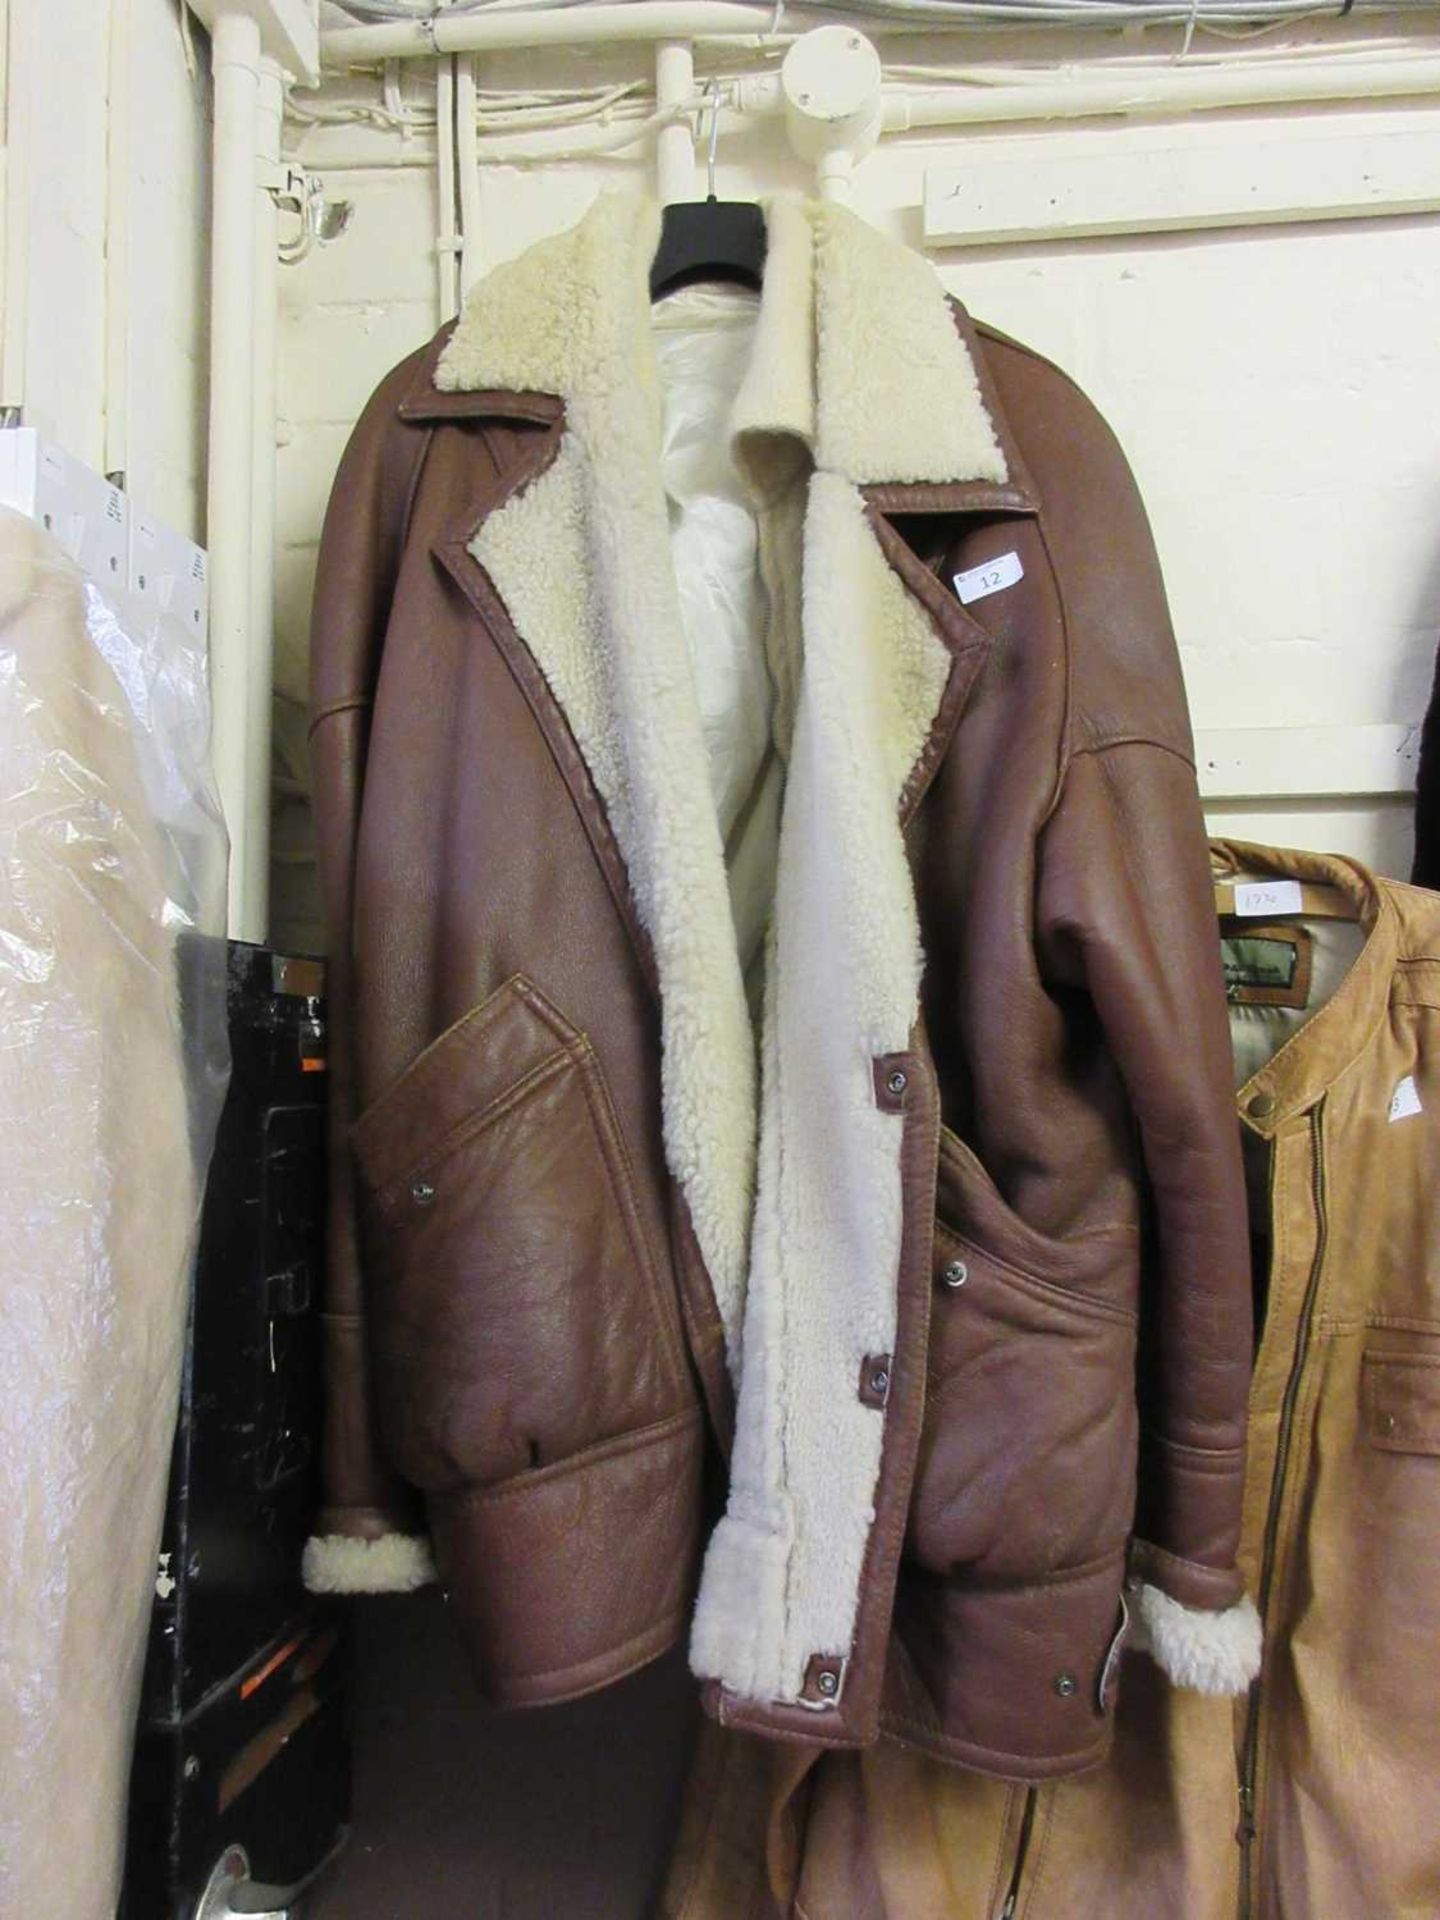 A First Cover real sheepskin jacket along with a knitted jacket